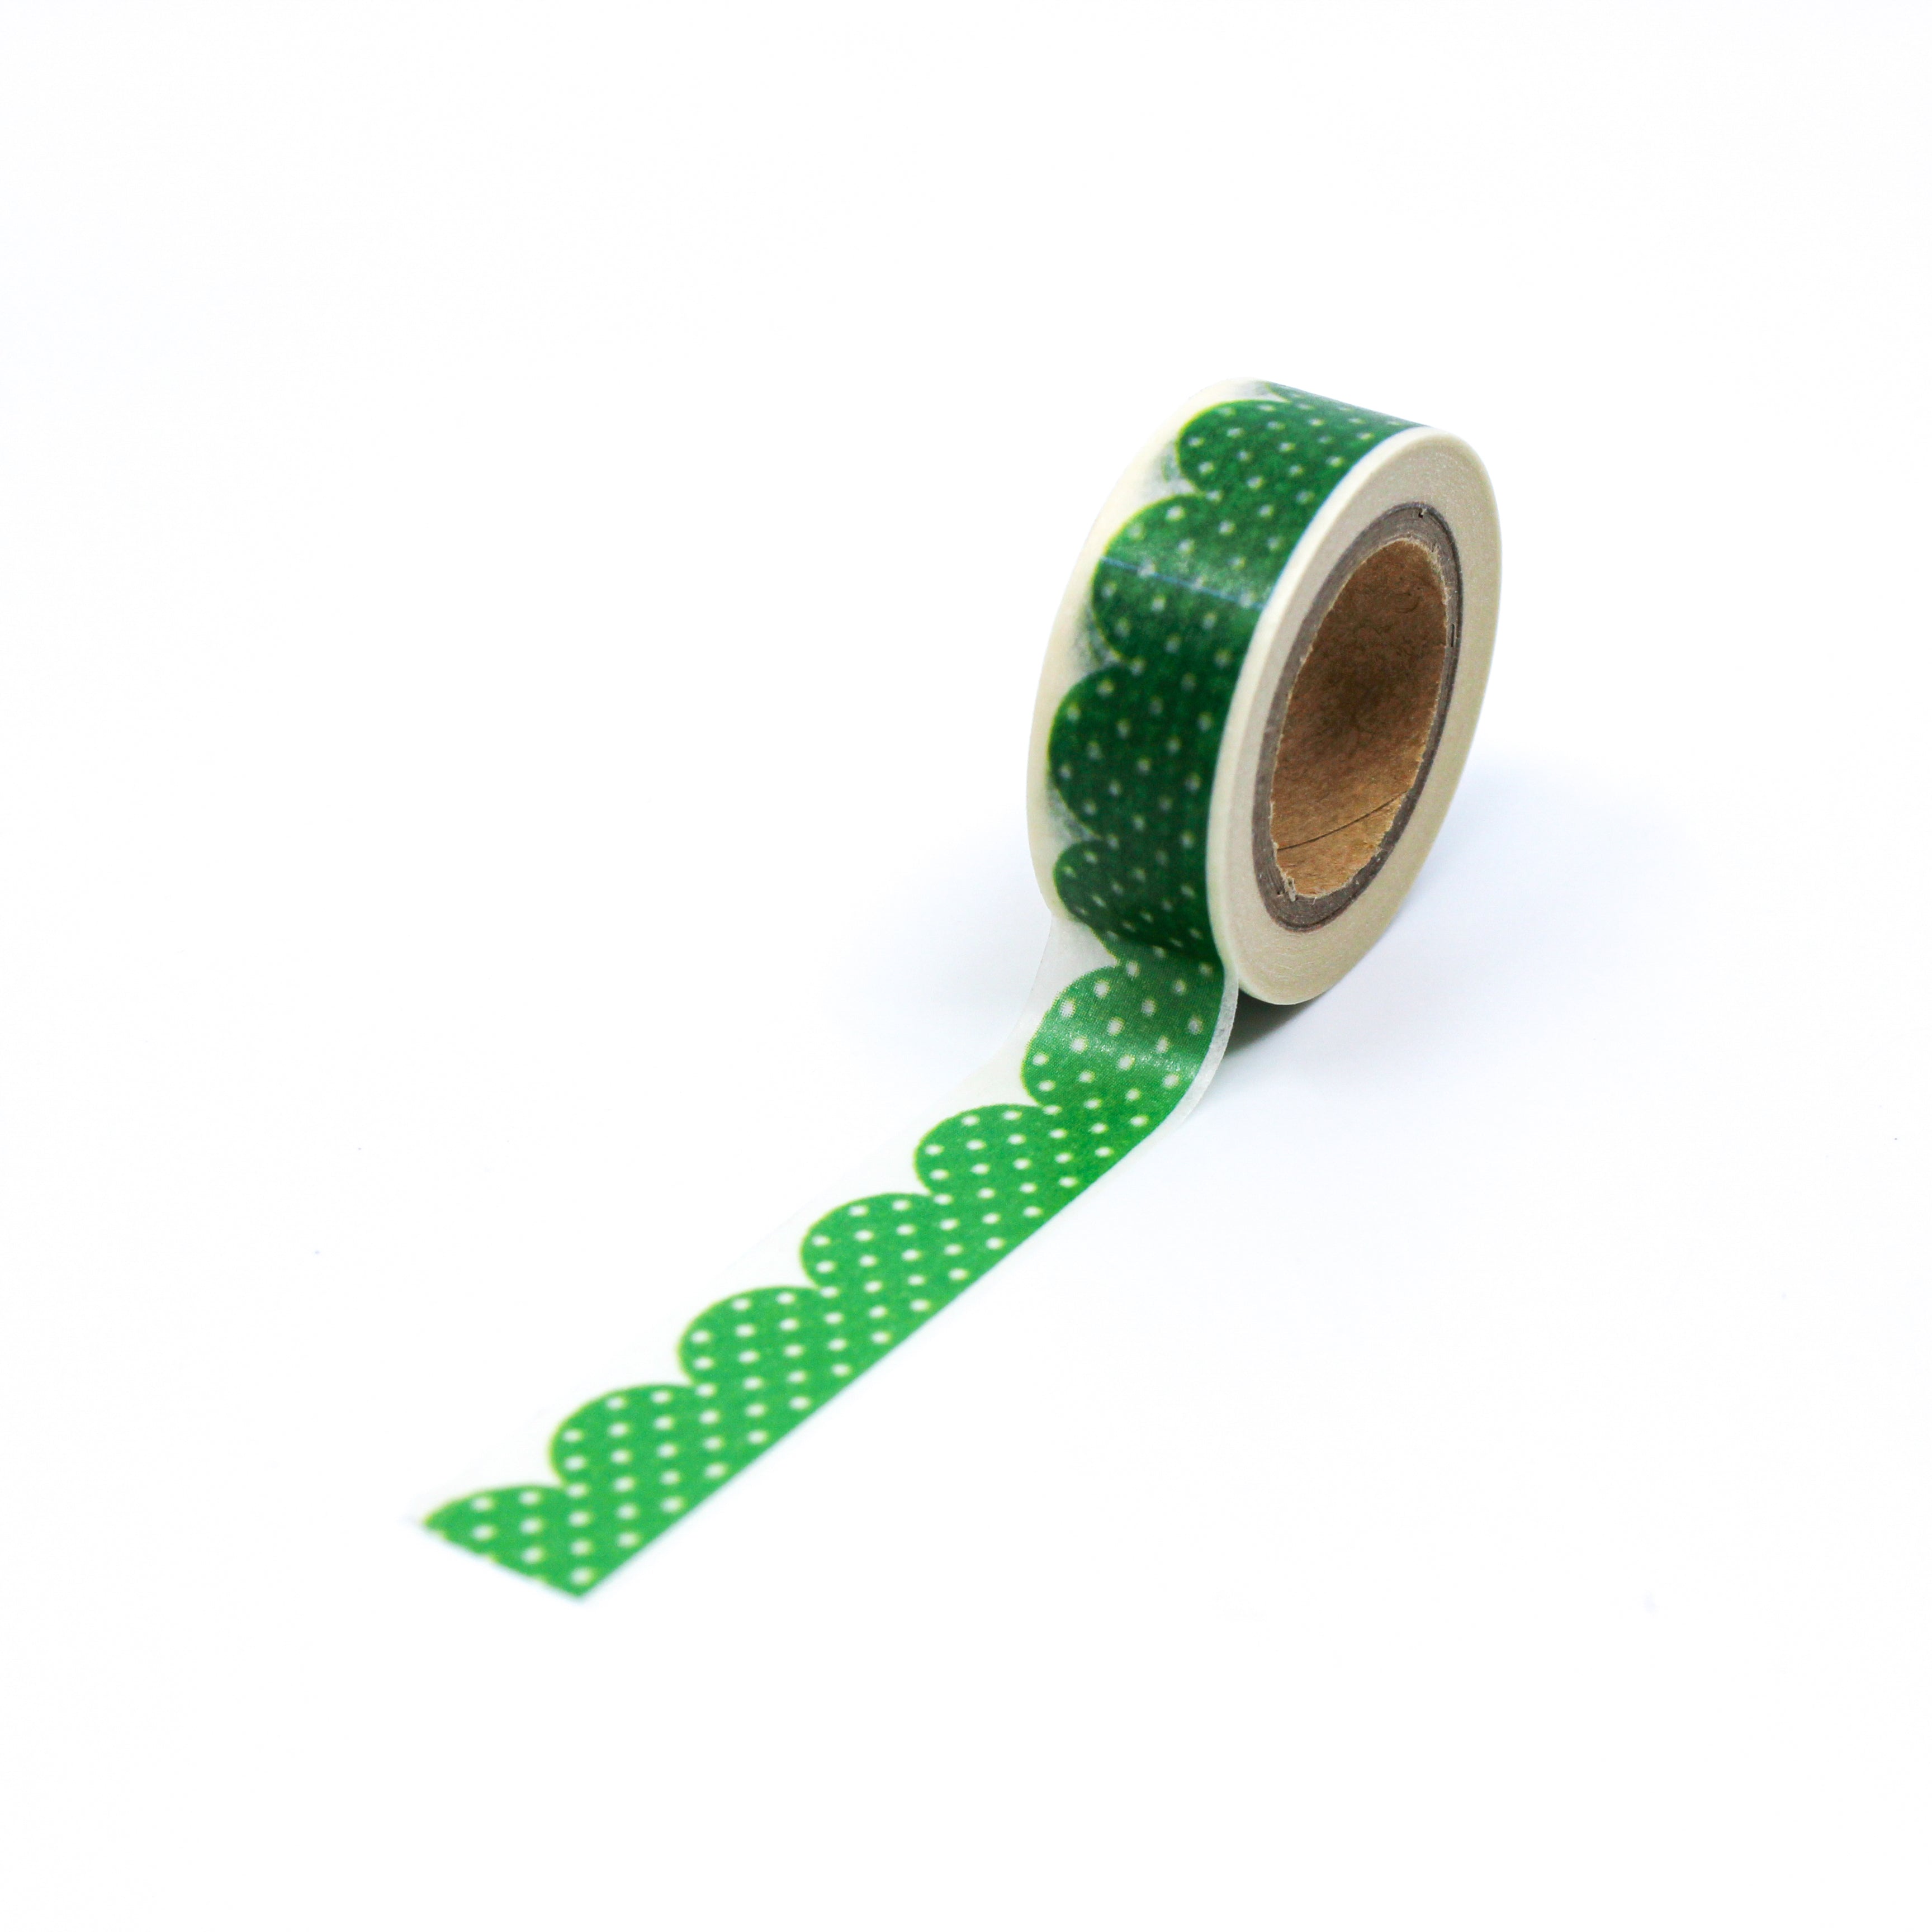 This is a full pattern repeat view of green dot scallop clouds washi tape BBB Supplies Craft Shop